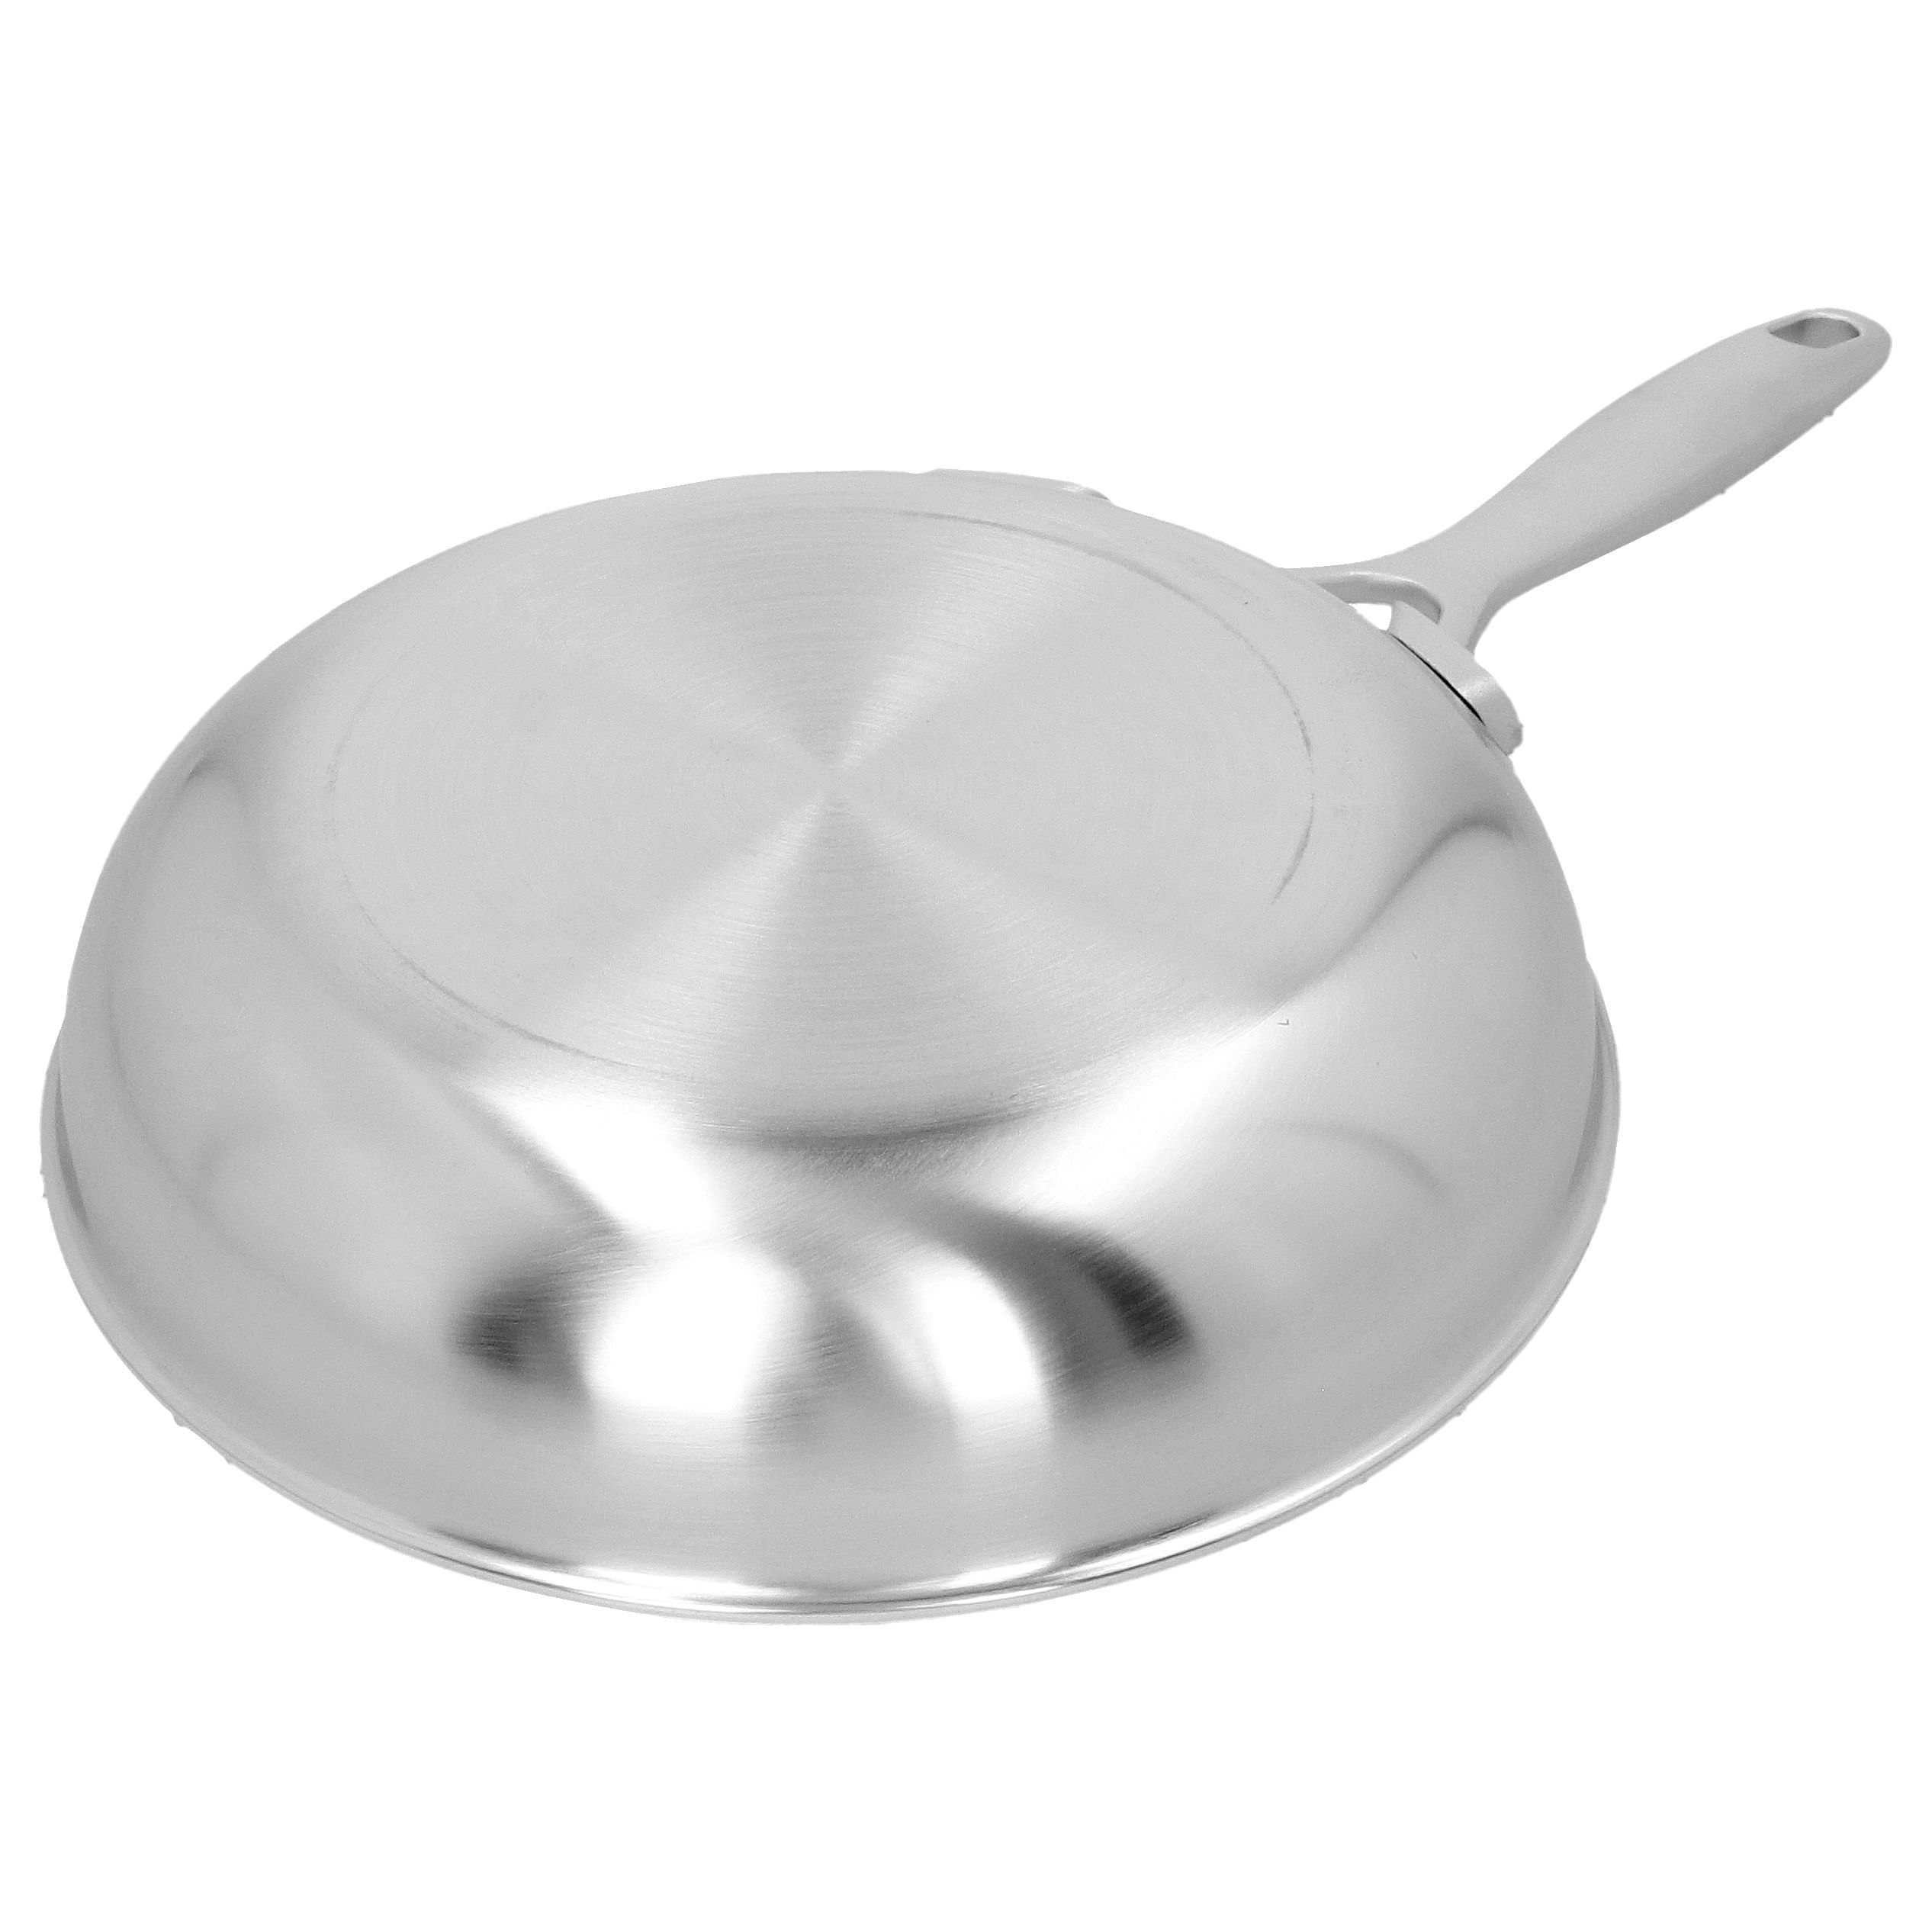 Demeyere Industry 5-Ply 8-inch Stainless Steel Fry Pan, 8-inch - Fred Meyer